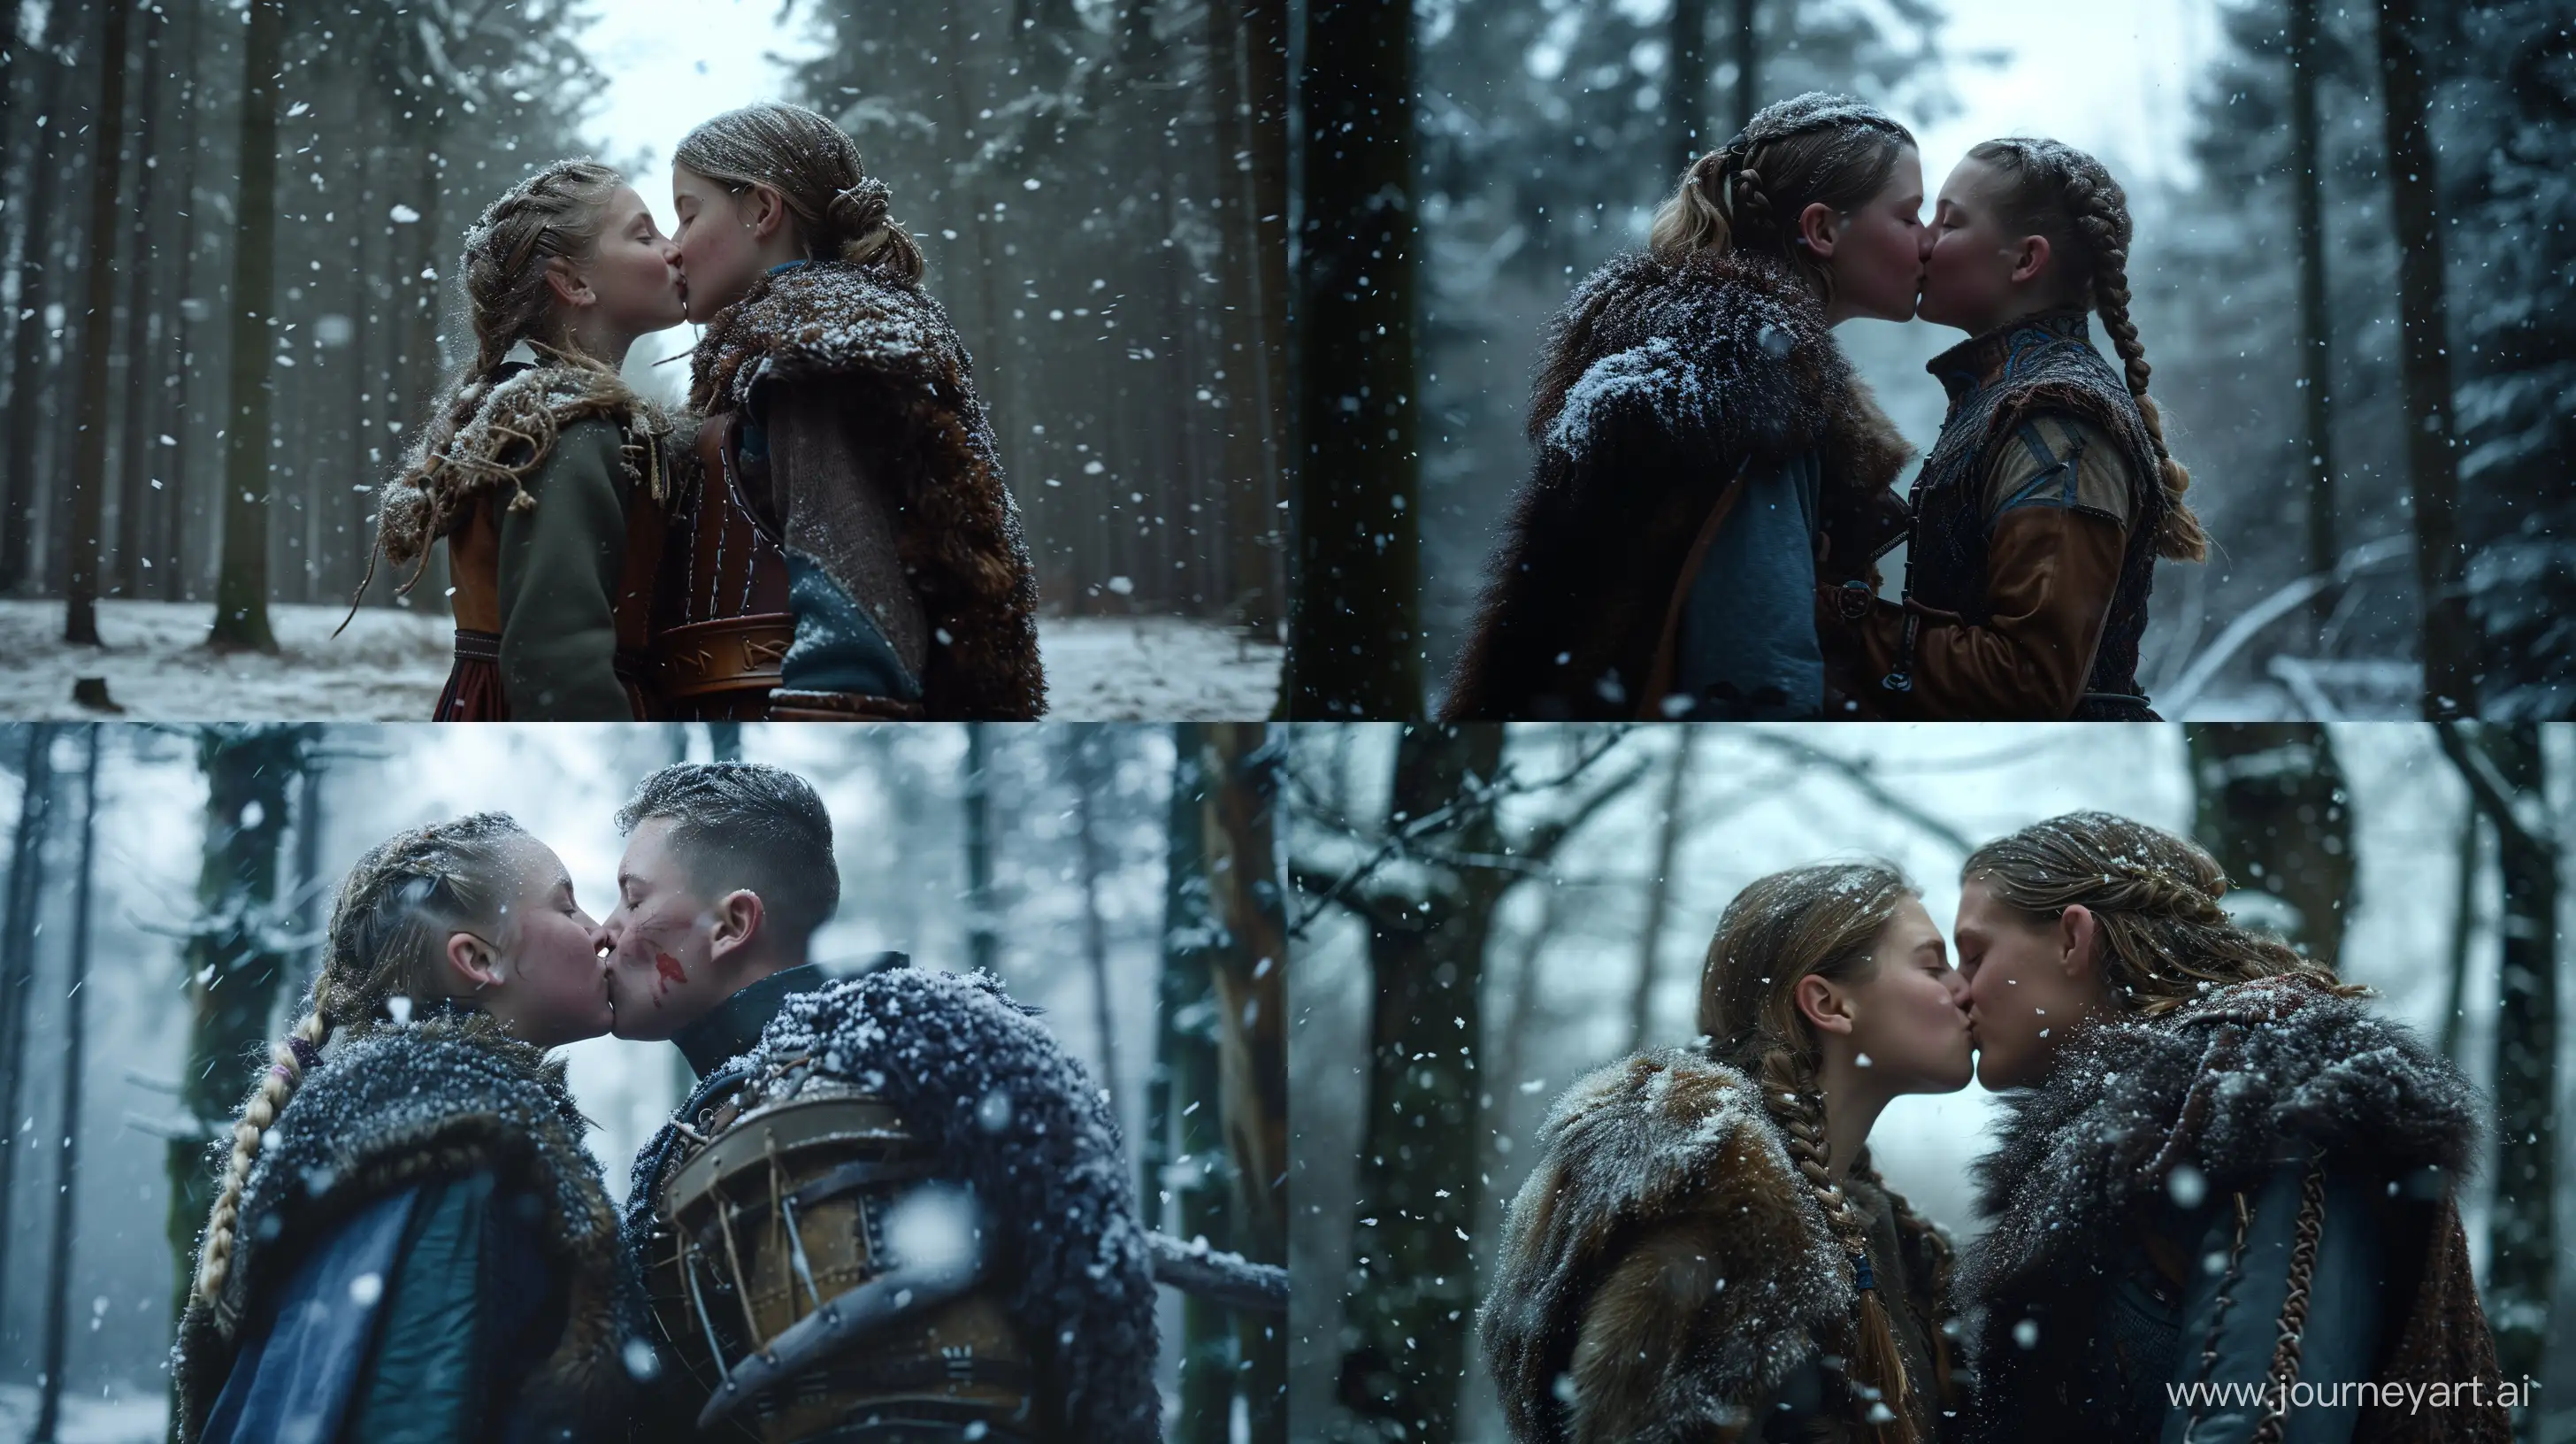 Teenage-Princess-and-Viking-Warrior-Share-a-Romantic-SnowKiss-in-Enchanted-Forest